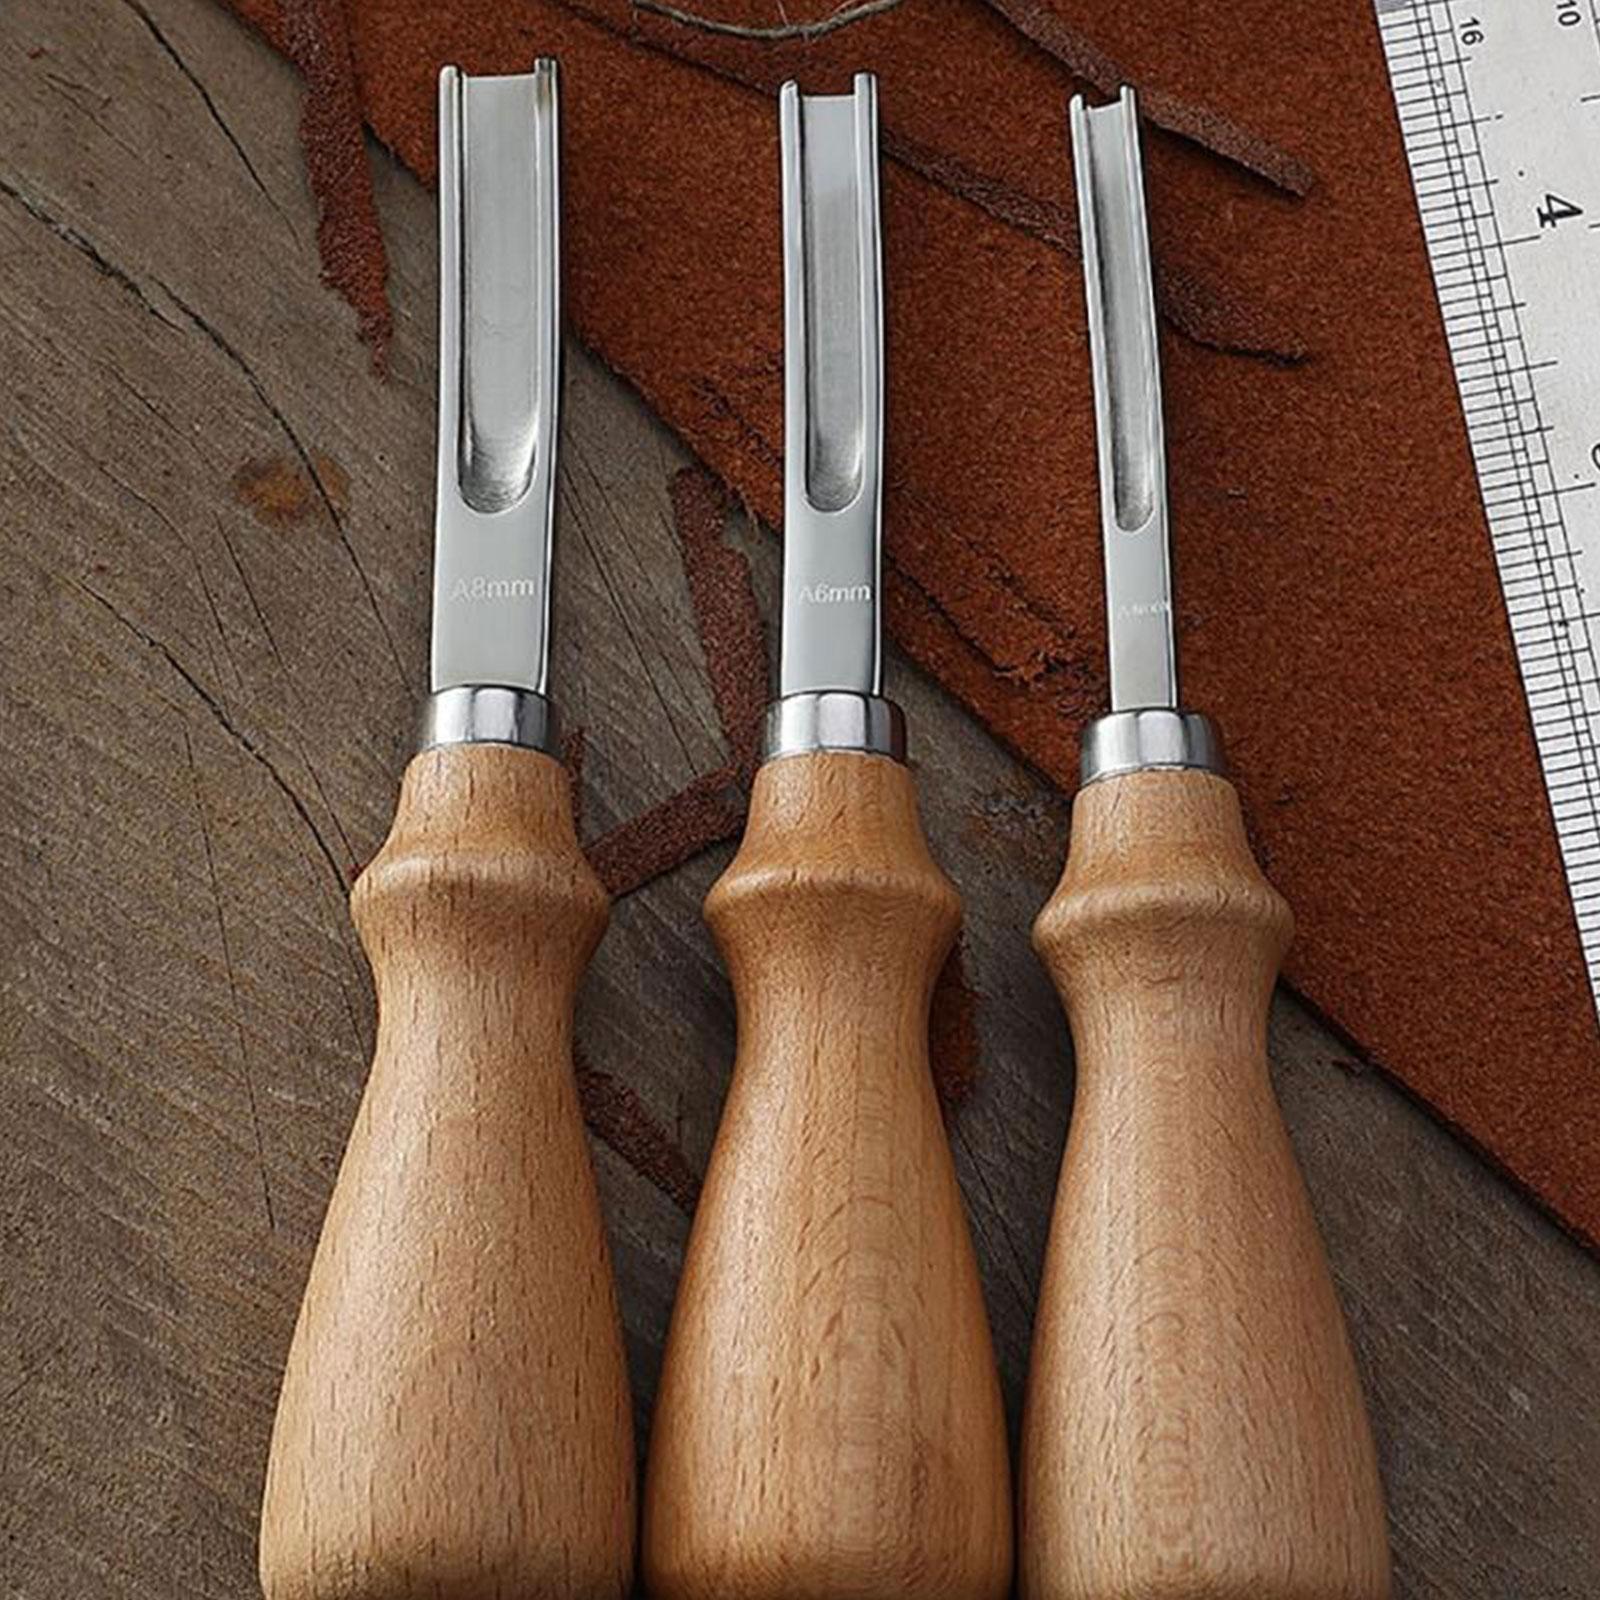 Leather Cutting Tool DIY Craft Cut Edge Skiving Carving Cutter Blade Tools  Knife